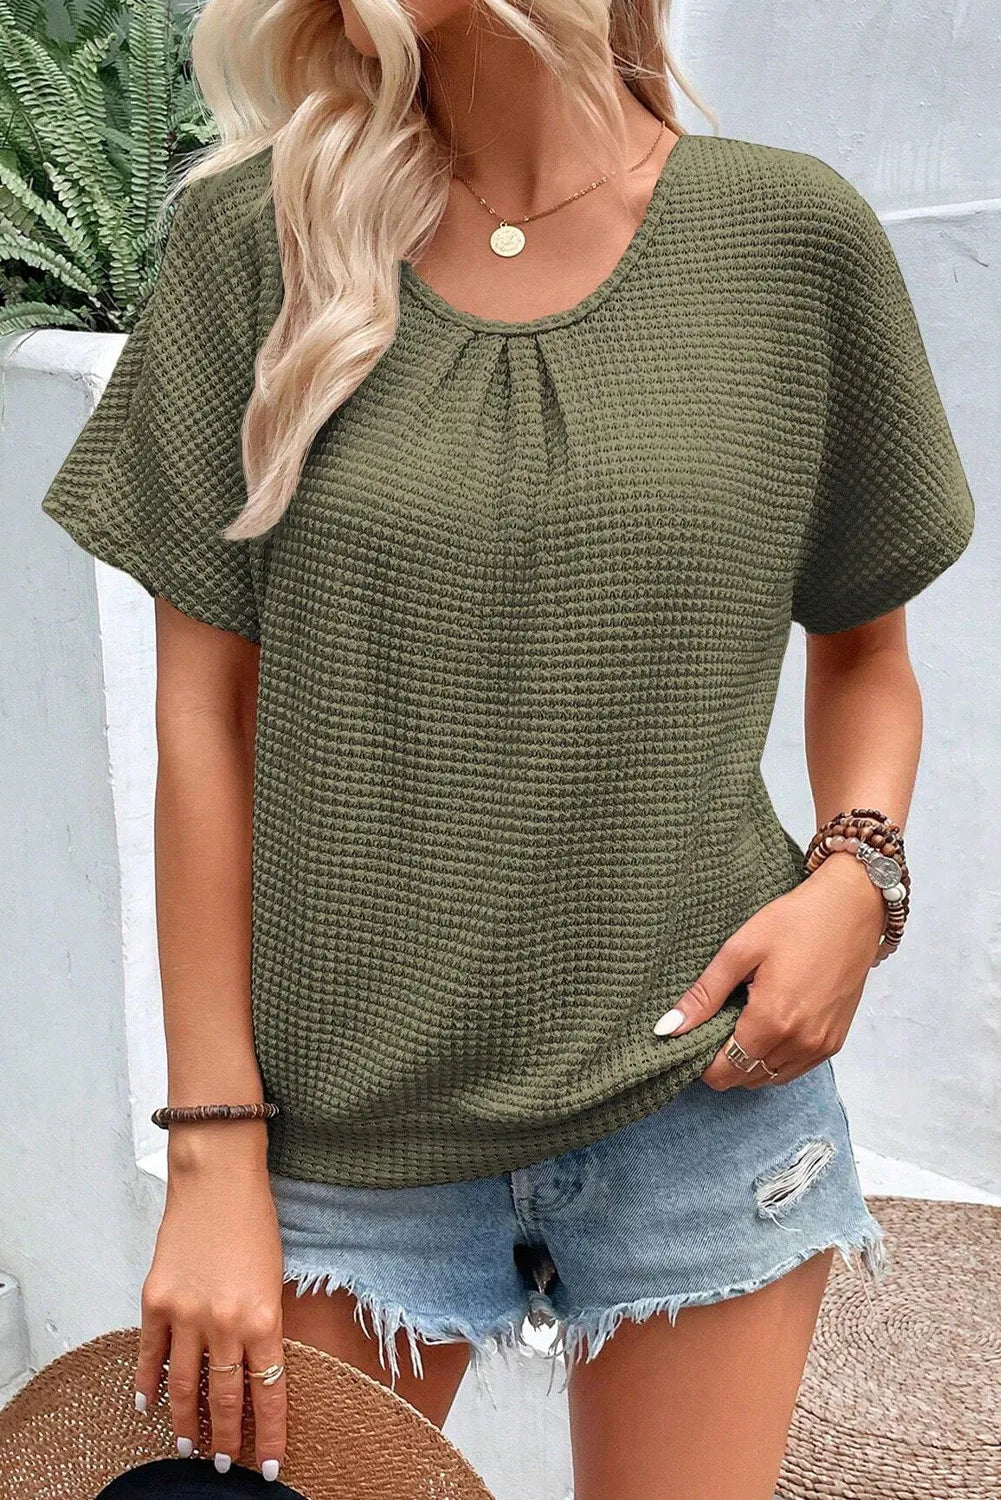 Chic Round Neck Tee with elegant lace back detailing, perfect for versatile, stylish comfort. Ideal for casual or smart-casual looks